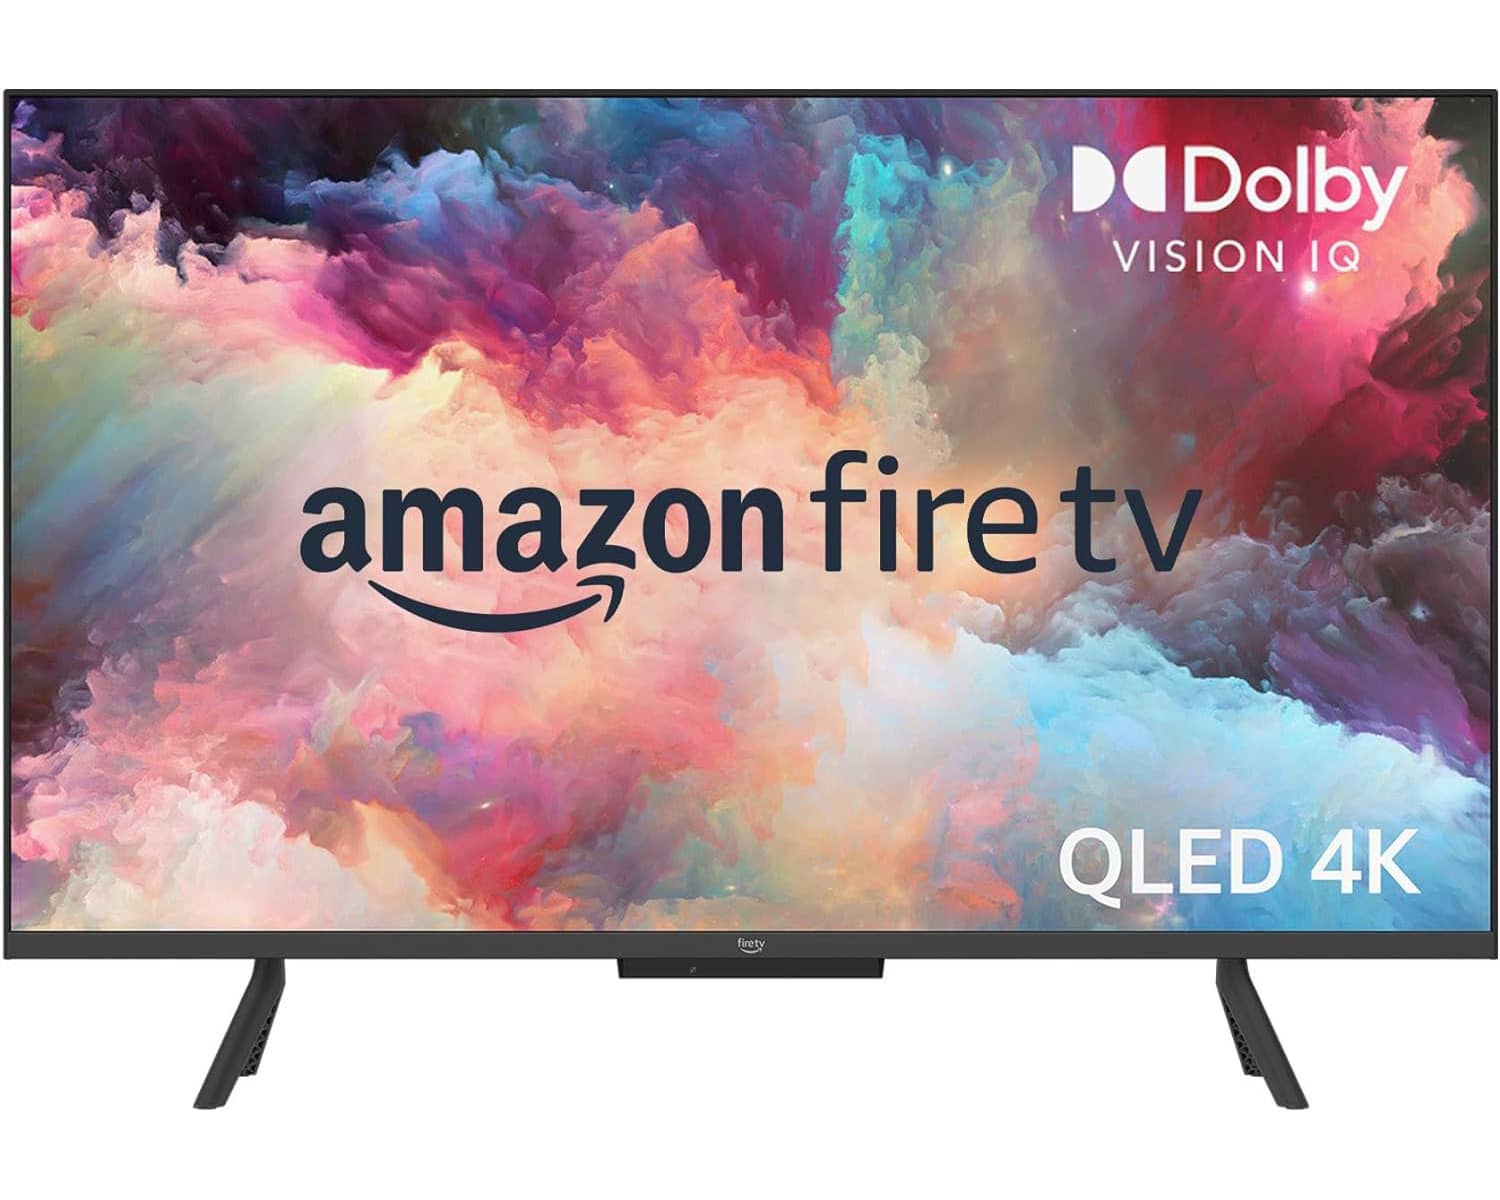 Amazon Fire TV 43" Omni QLED Series 4K UHD smart TV, Dolby Vision IQ, 1,700+ free artwork pieces, hands-free with Alexa